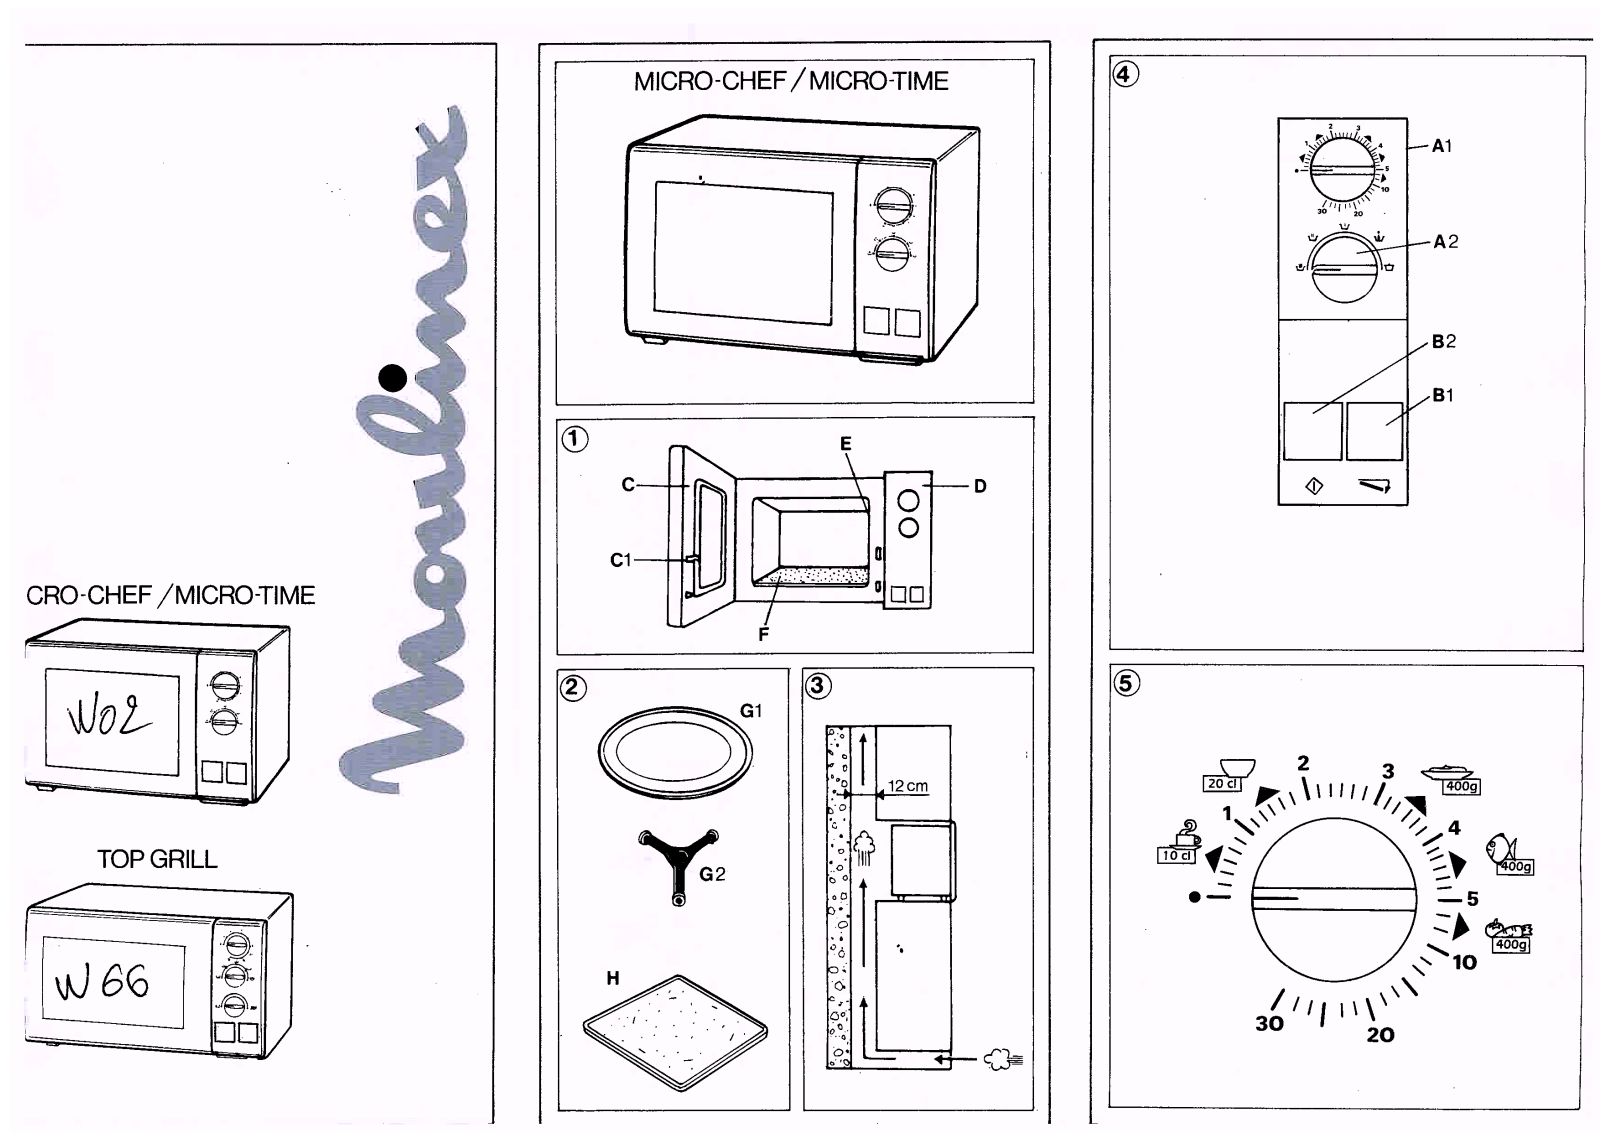 MOULINEX TOP GRILL User Manual